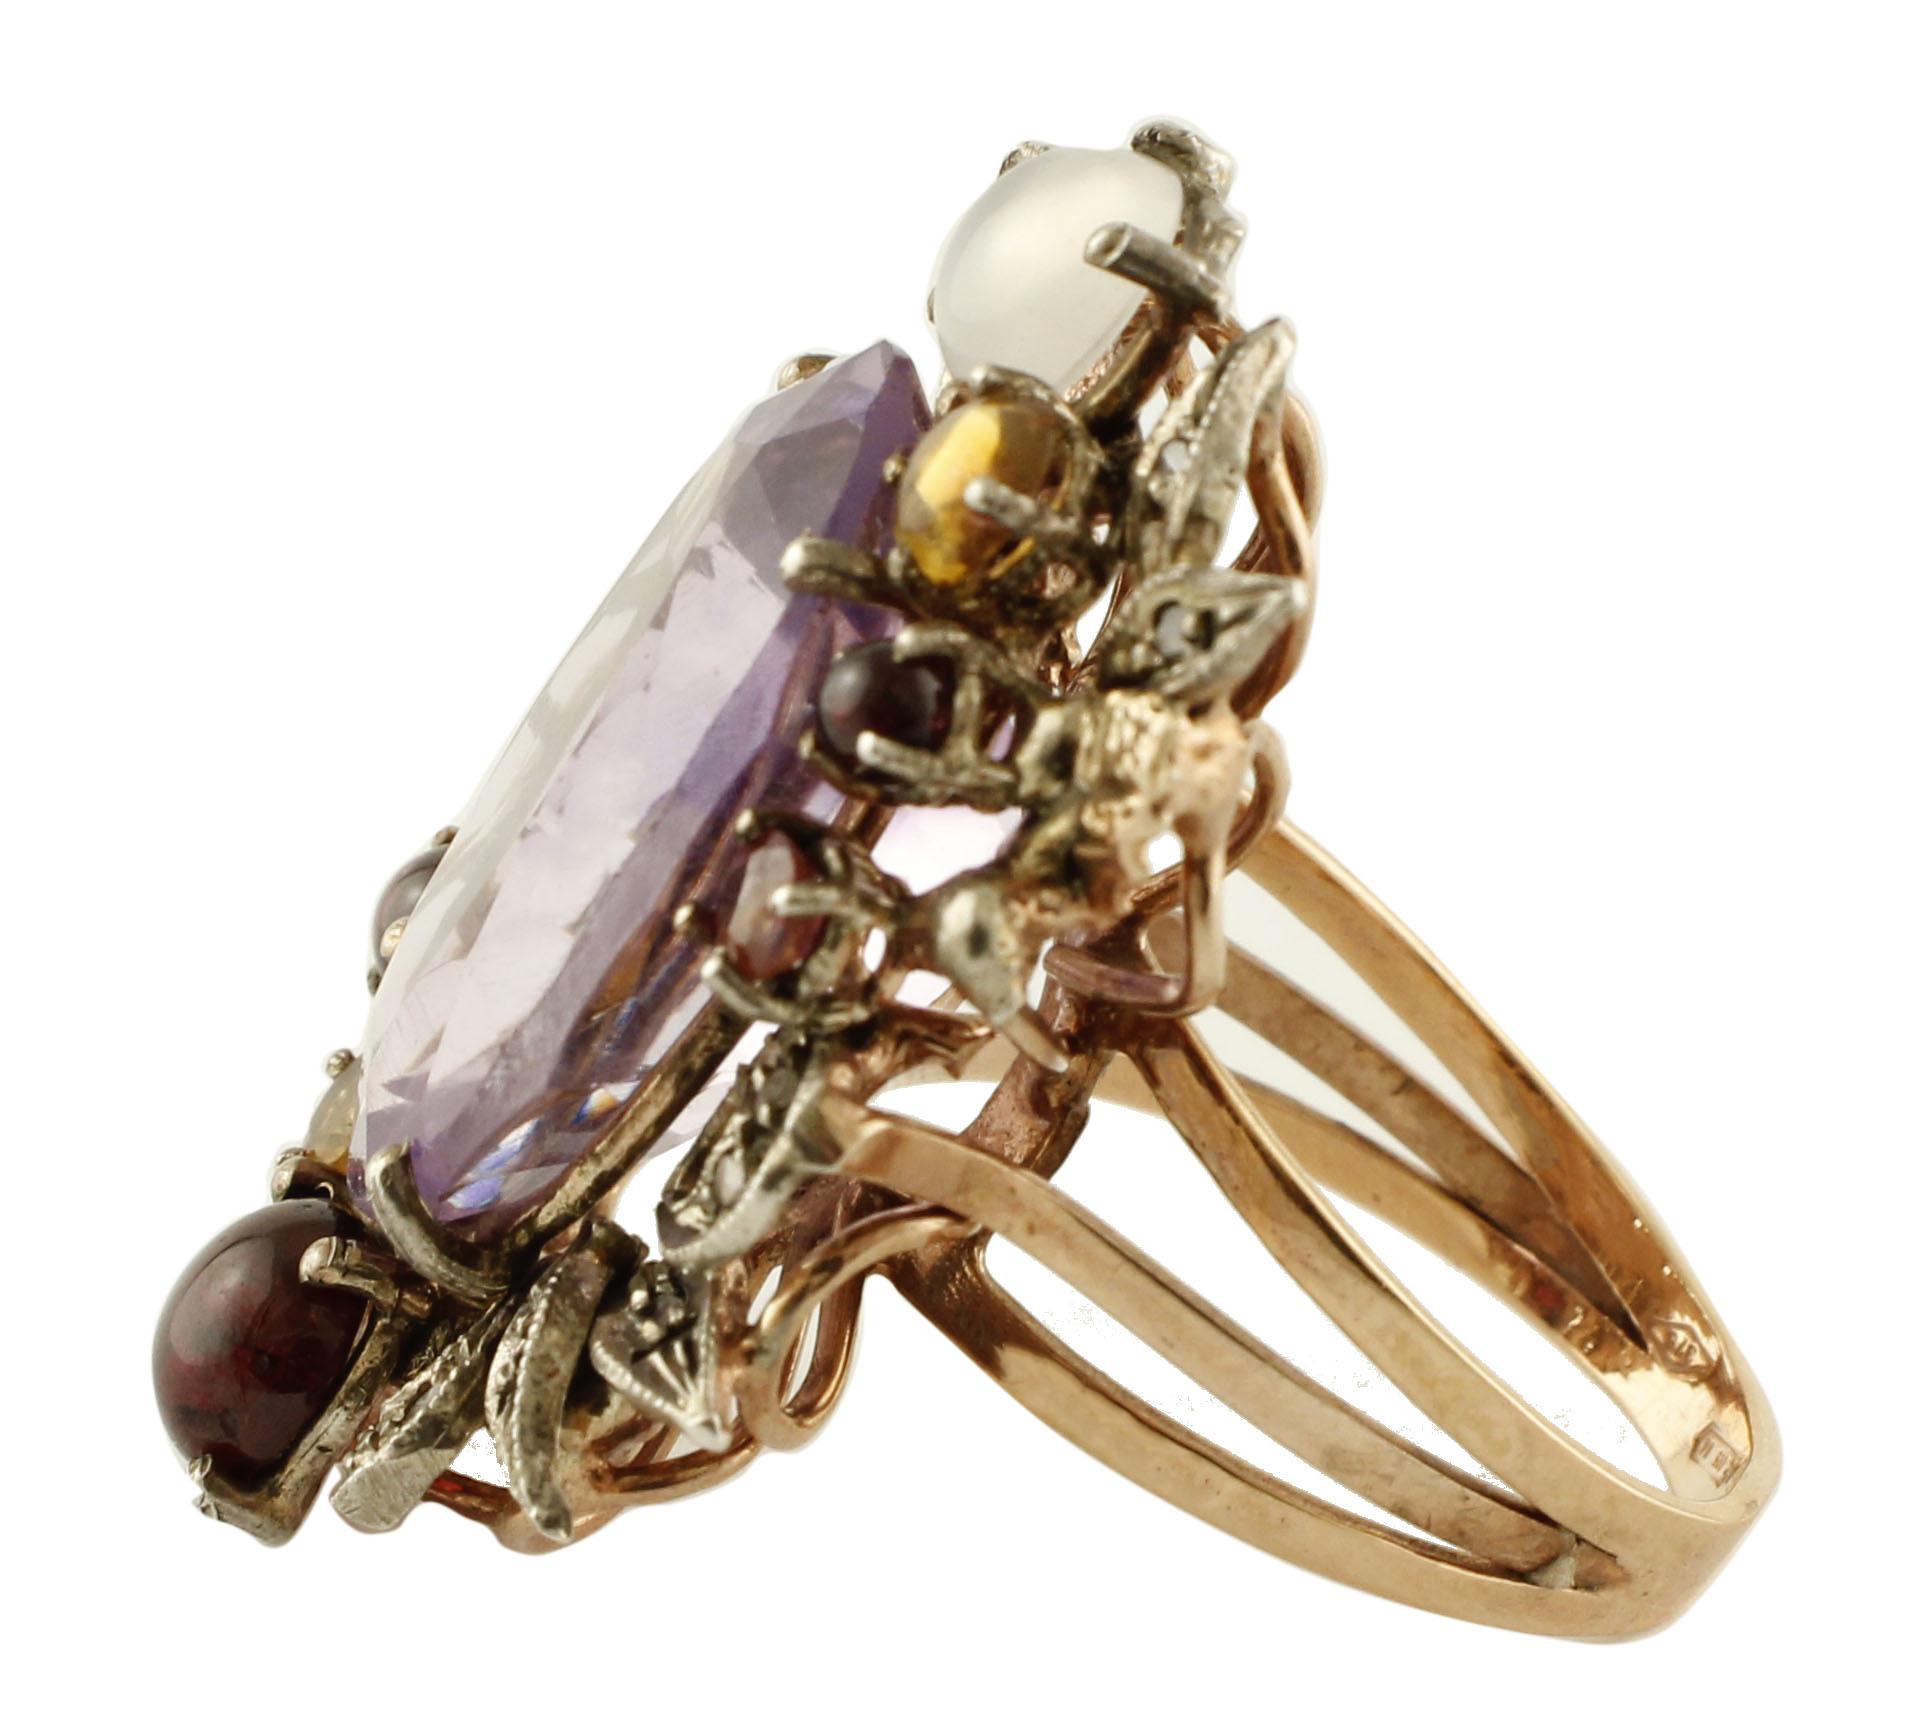 Unique retrò ring in 9K rose gold and silver structure composed of big amethyst (20 mm X 15 mm) in the center surrounded by yellow topazes, garnets, moonstone and it's embellished by leaves detailes studded by little diamonds. 
Diamonds 0.13 ct